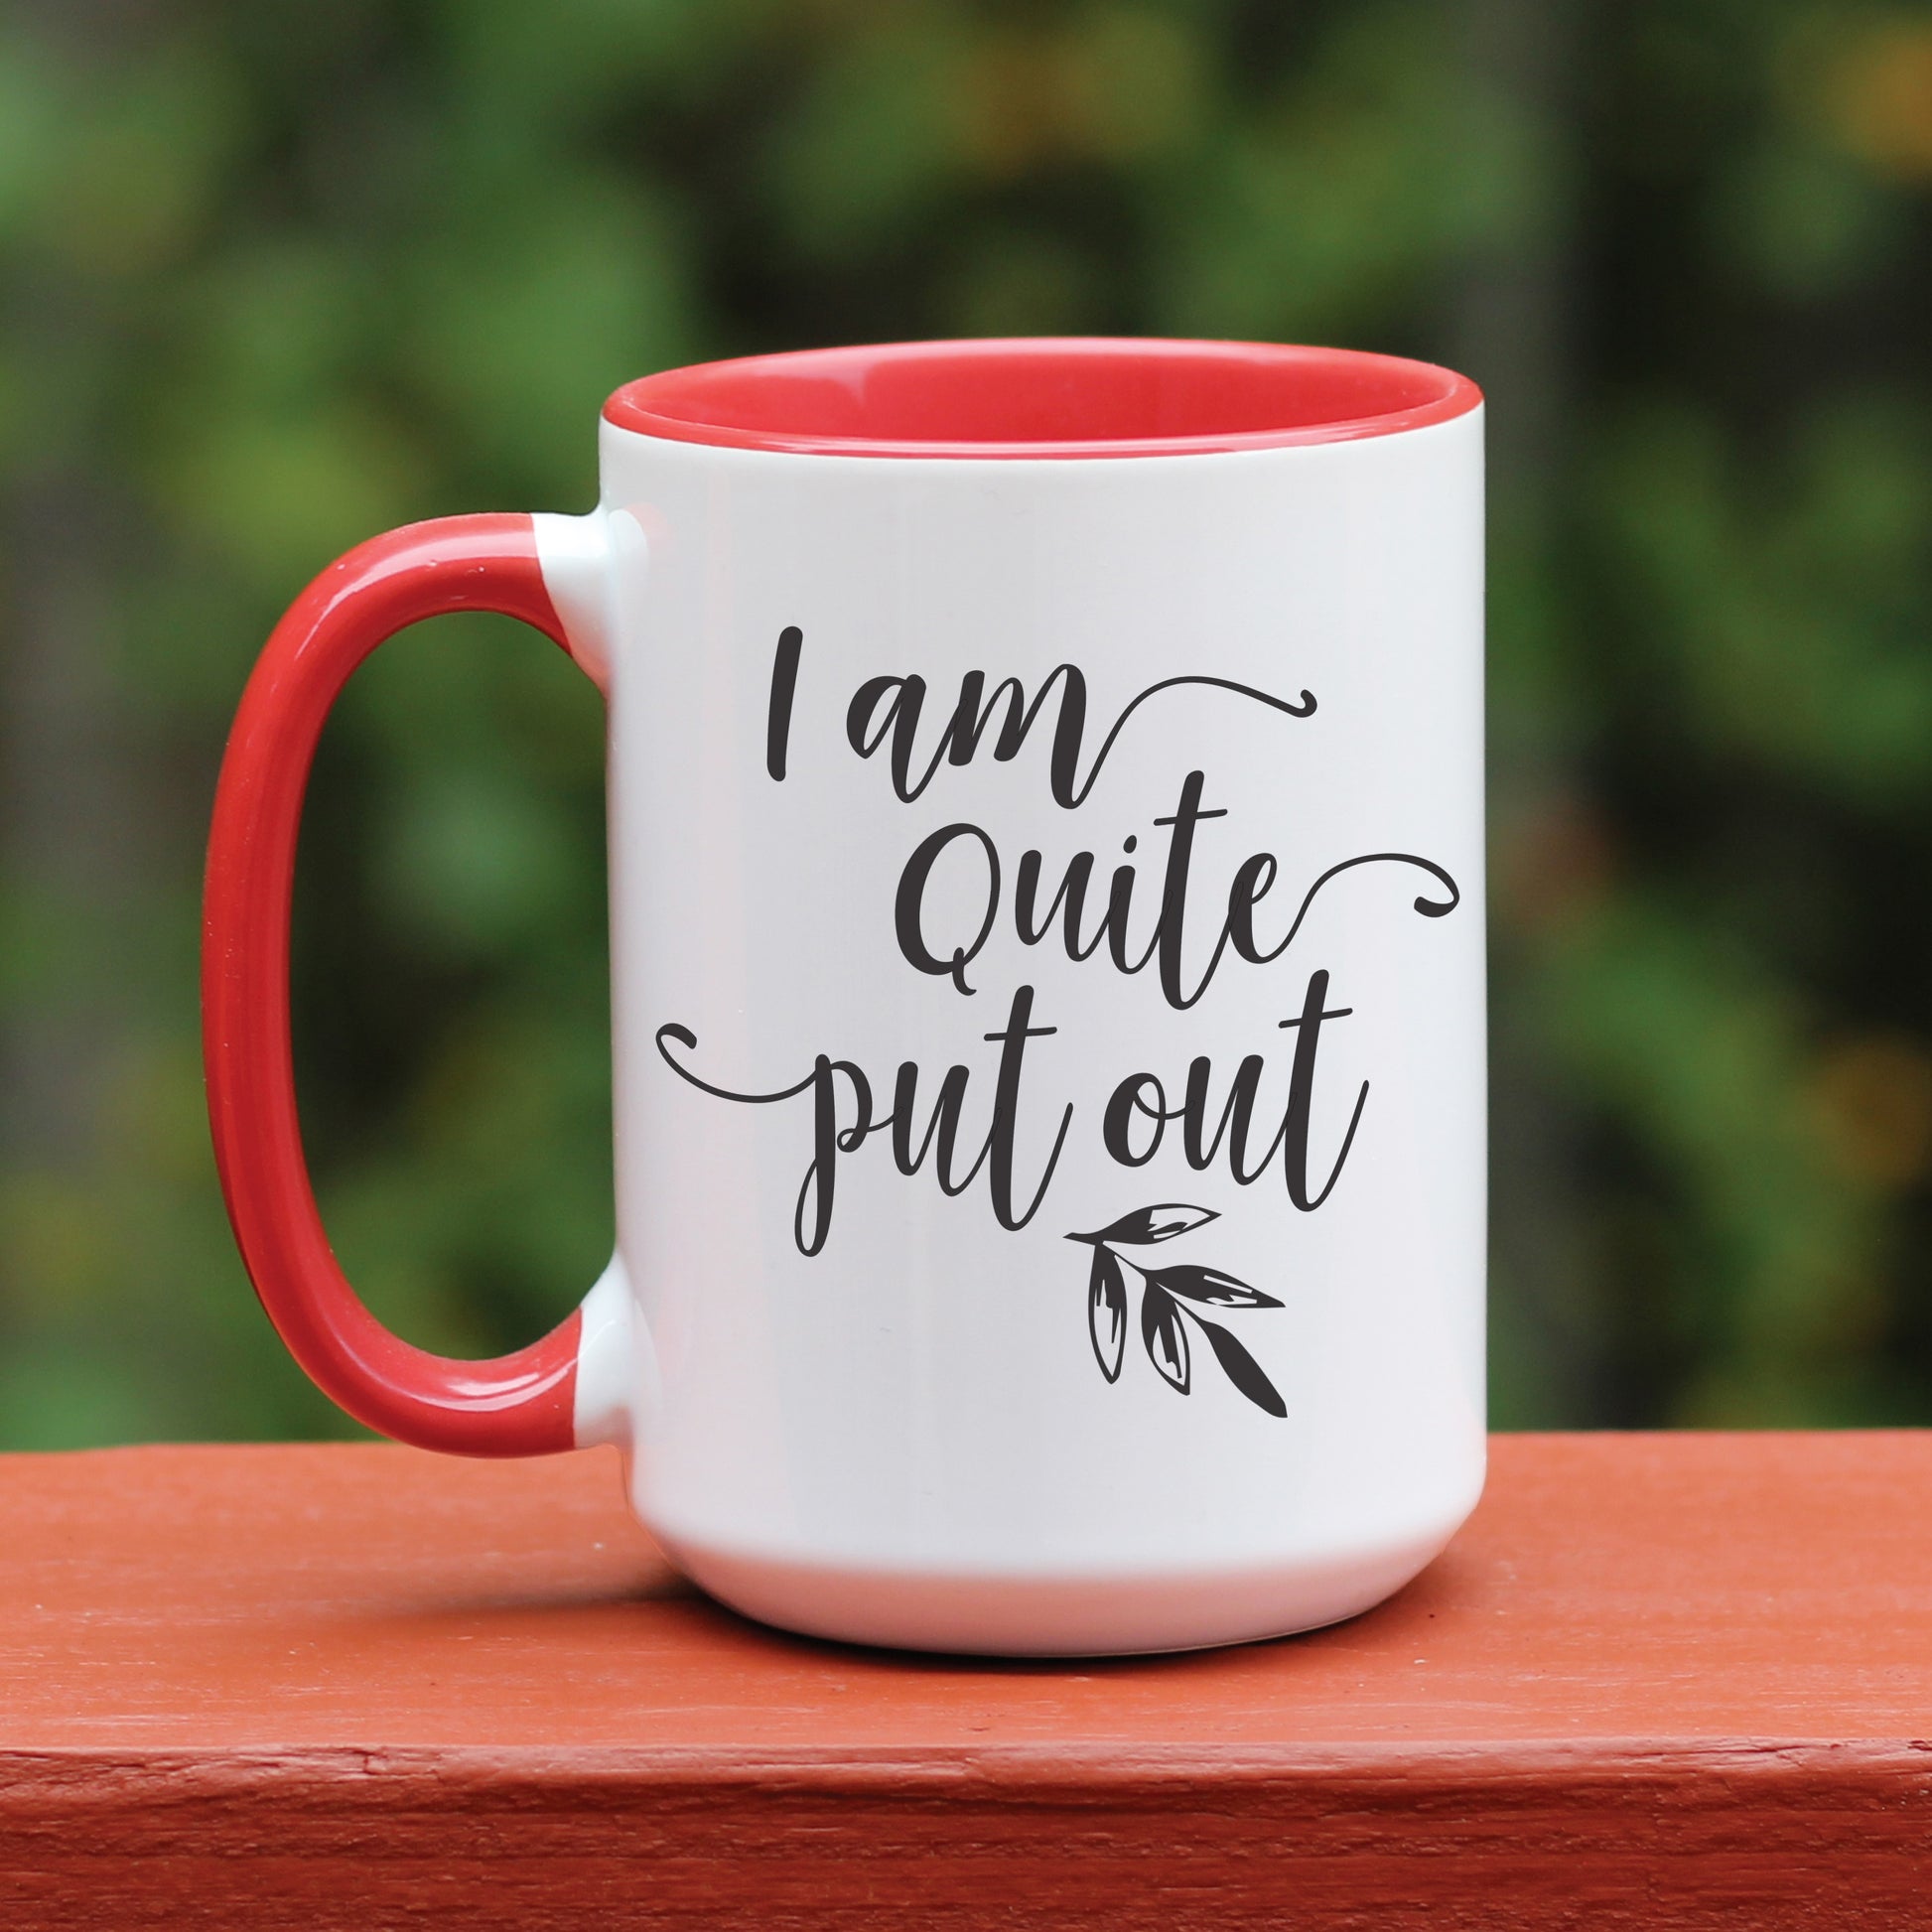 I am quite put out mug with red handle